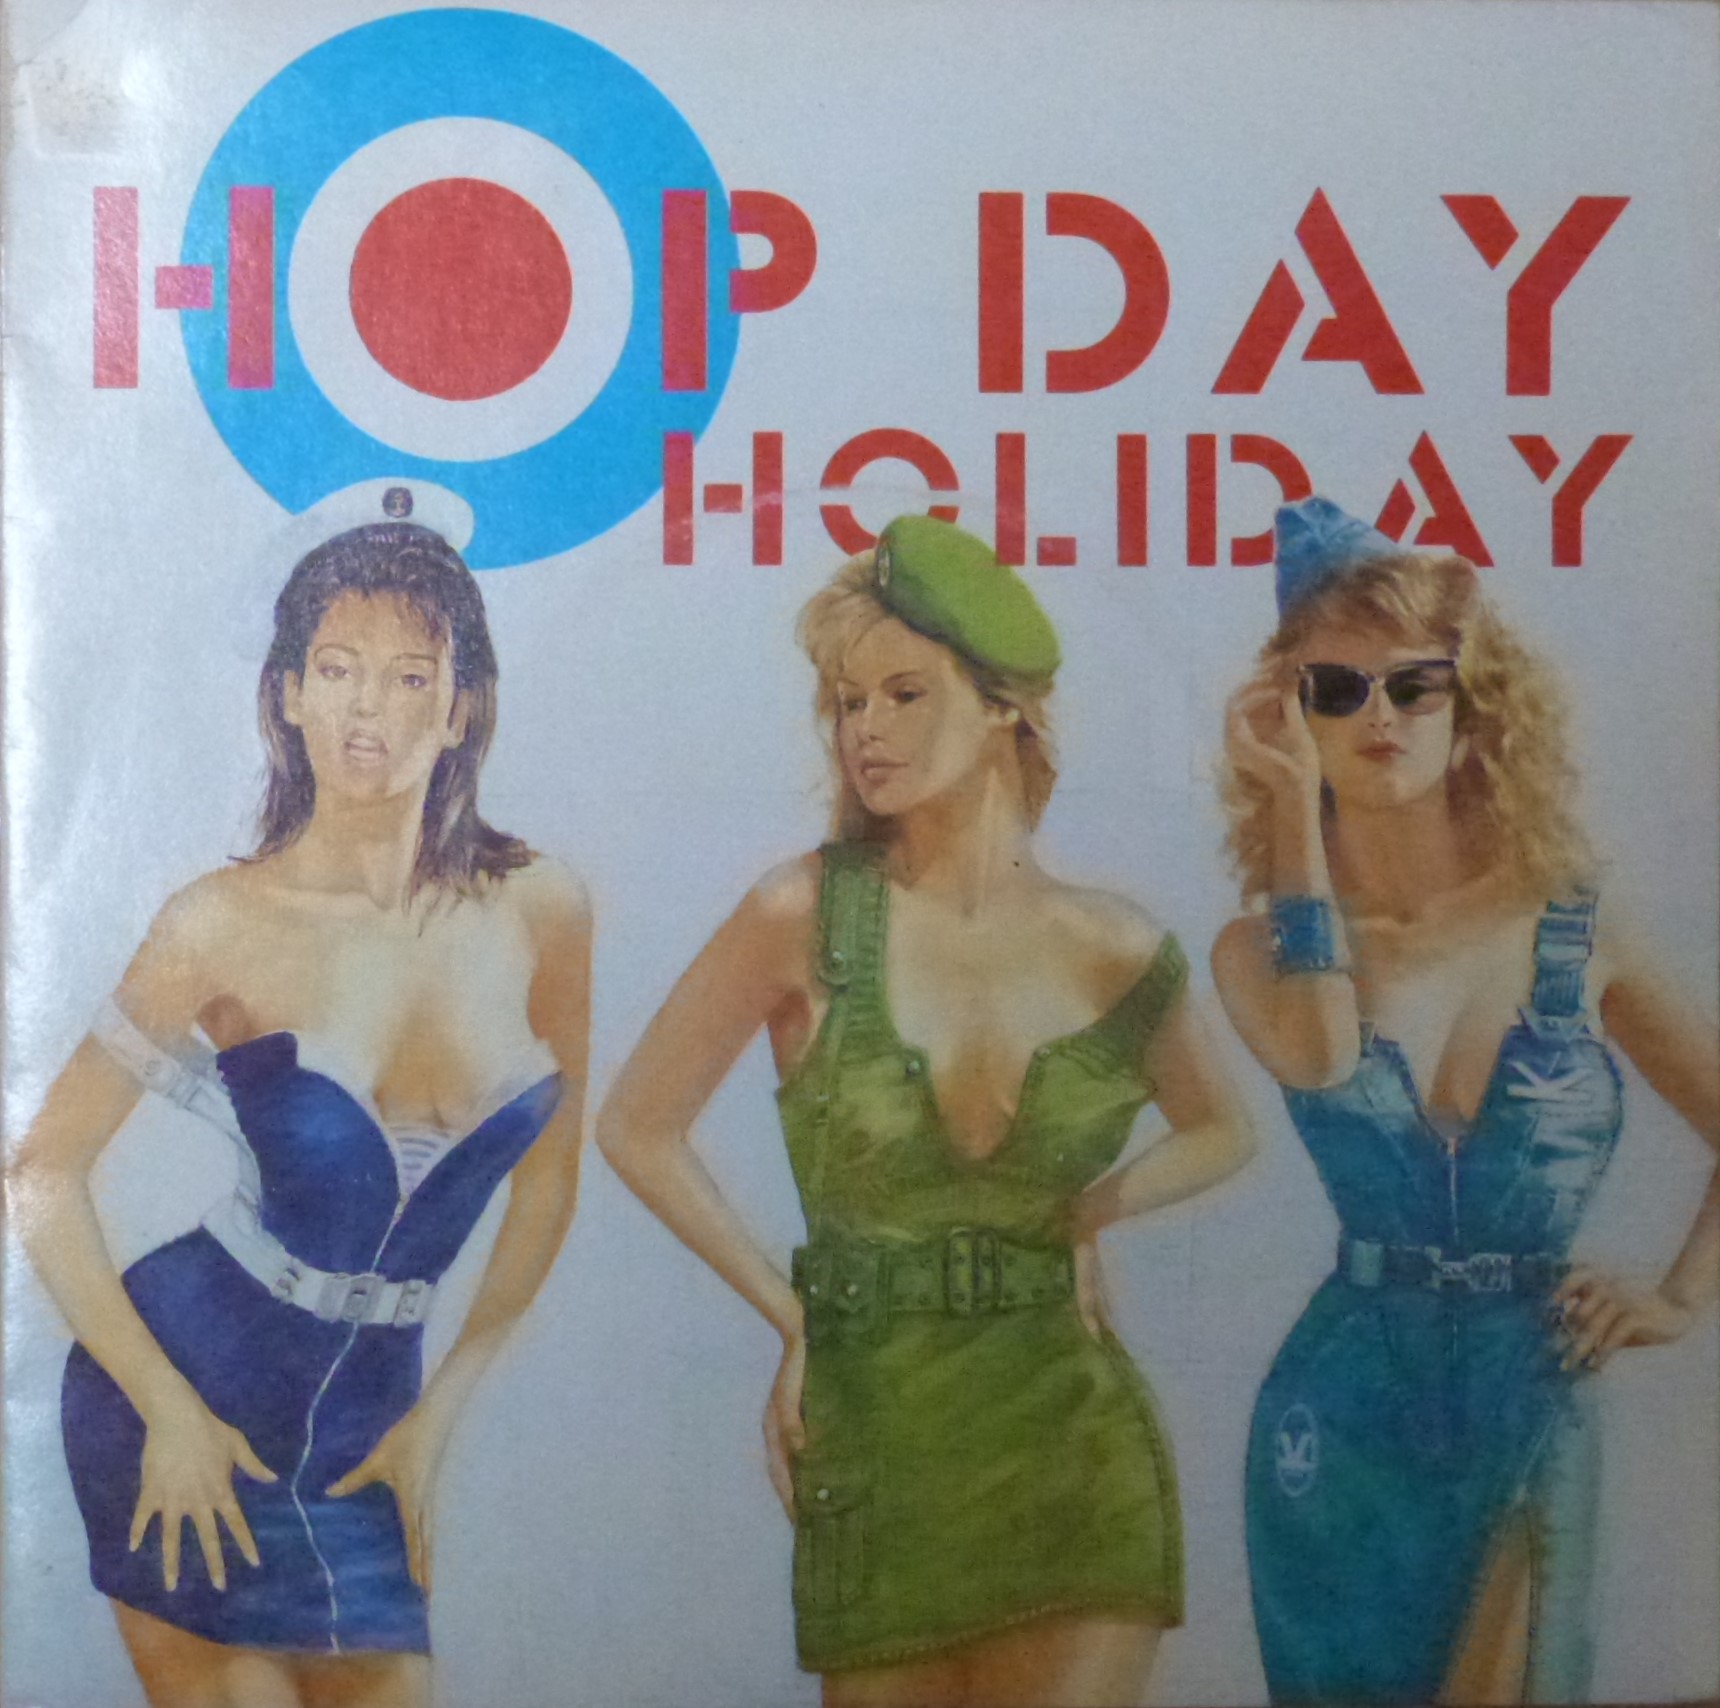 Hop Day Holiday